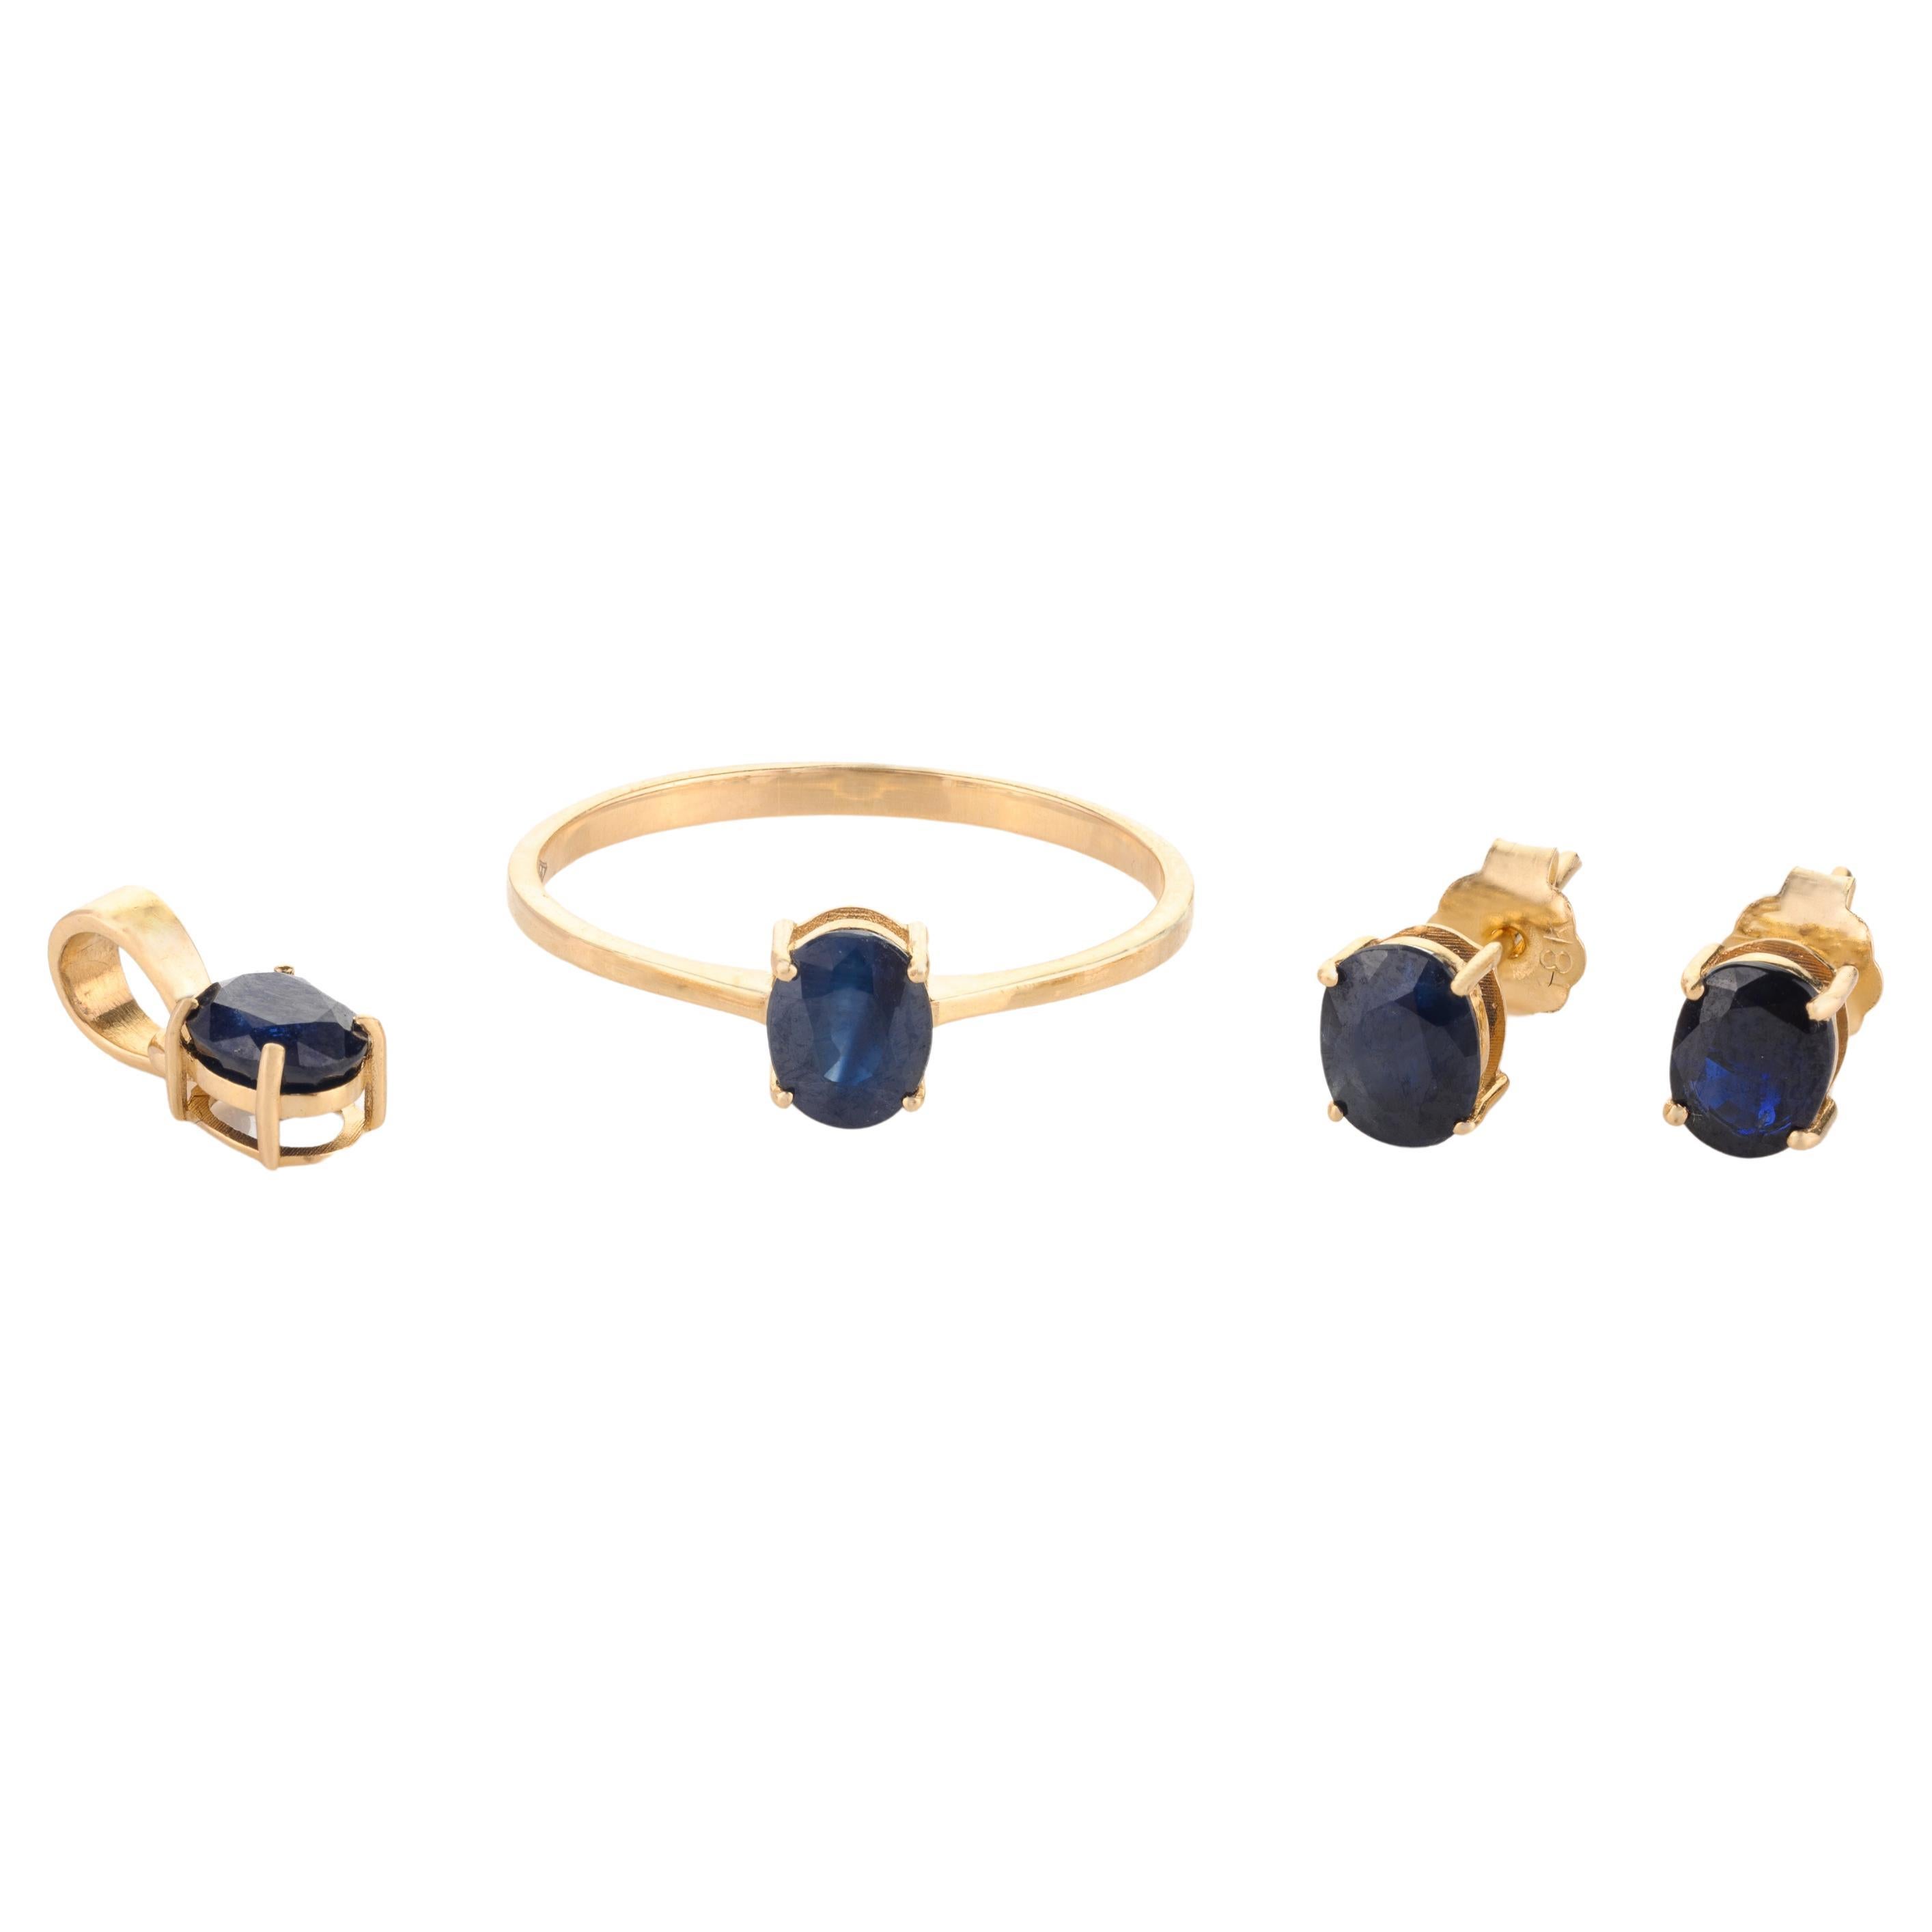 Blue Sapphire Ring, Pendant and Earrings Jewelry Set Made in 18k Yellow Gold